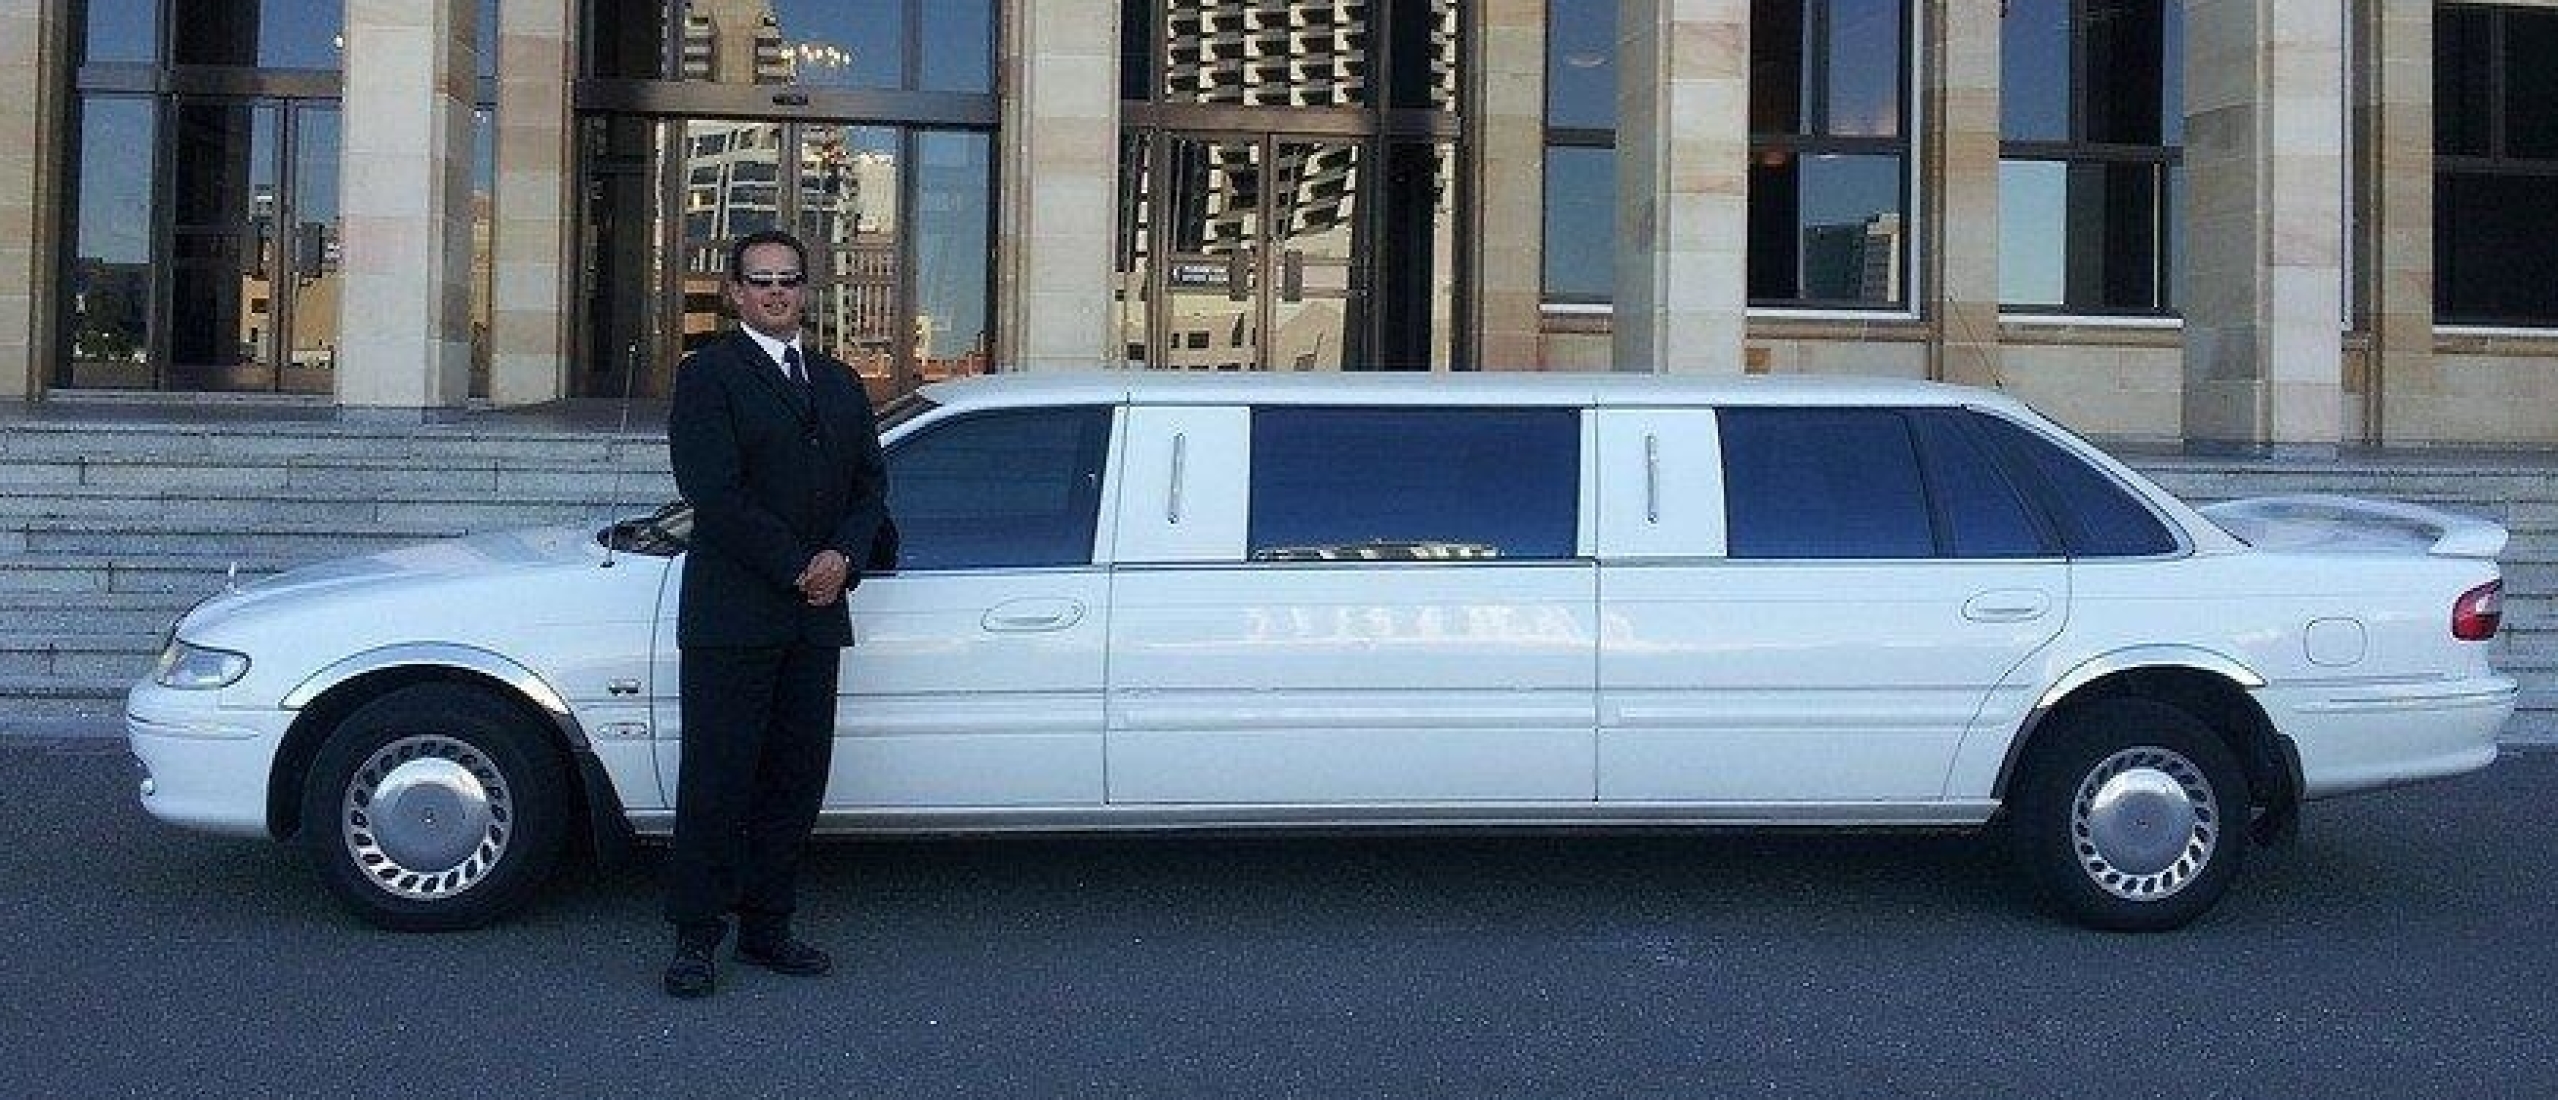 4 Ways Chauffeured Transportation Makes Special Events Unforgettable